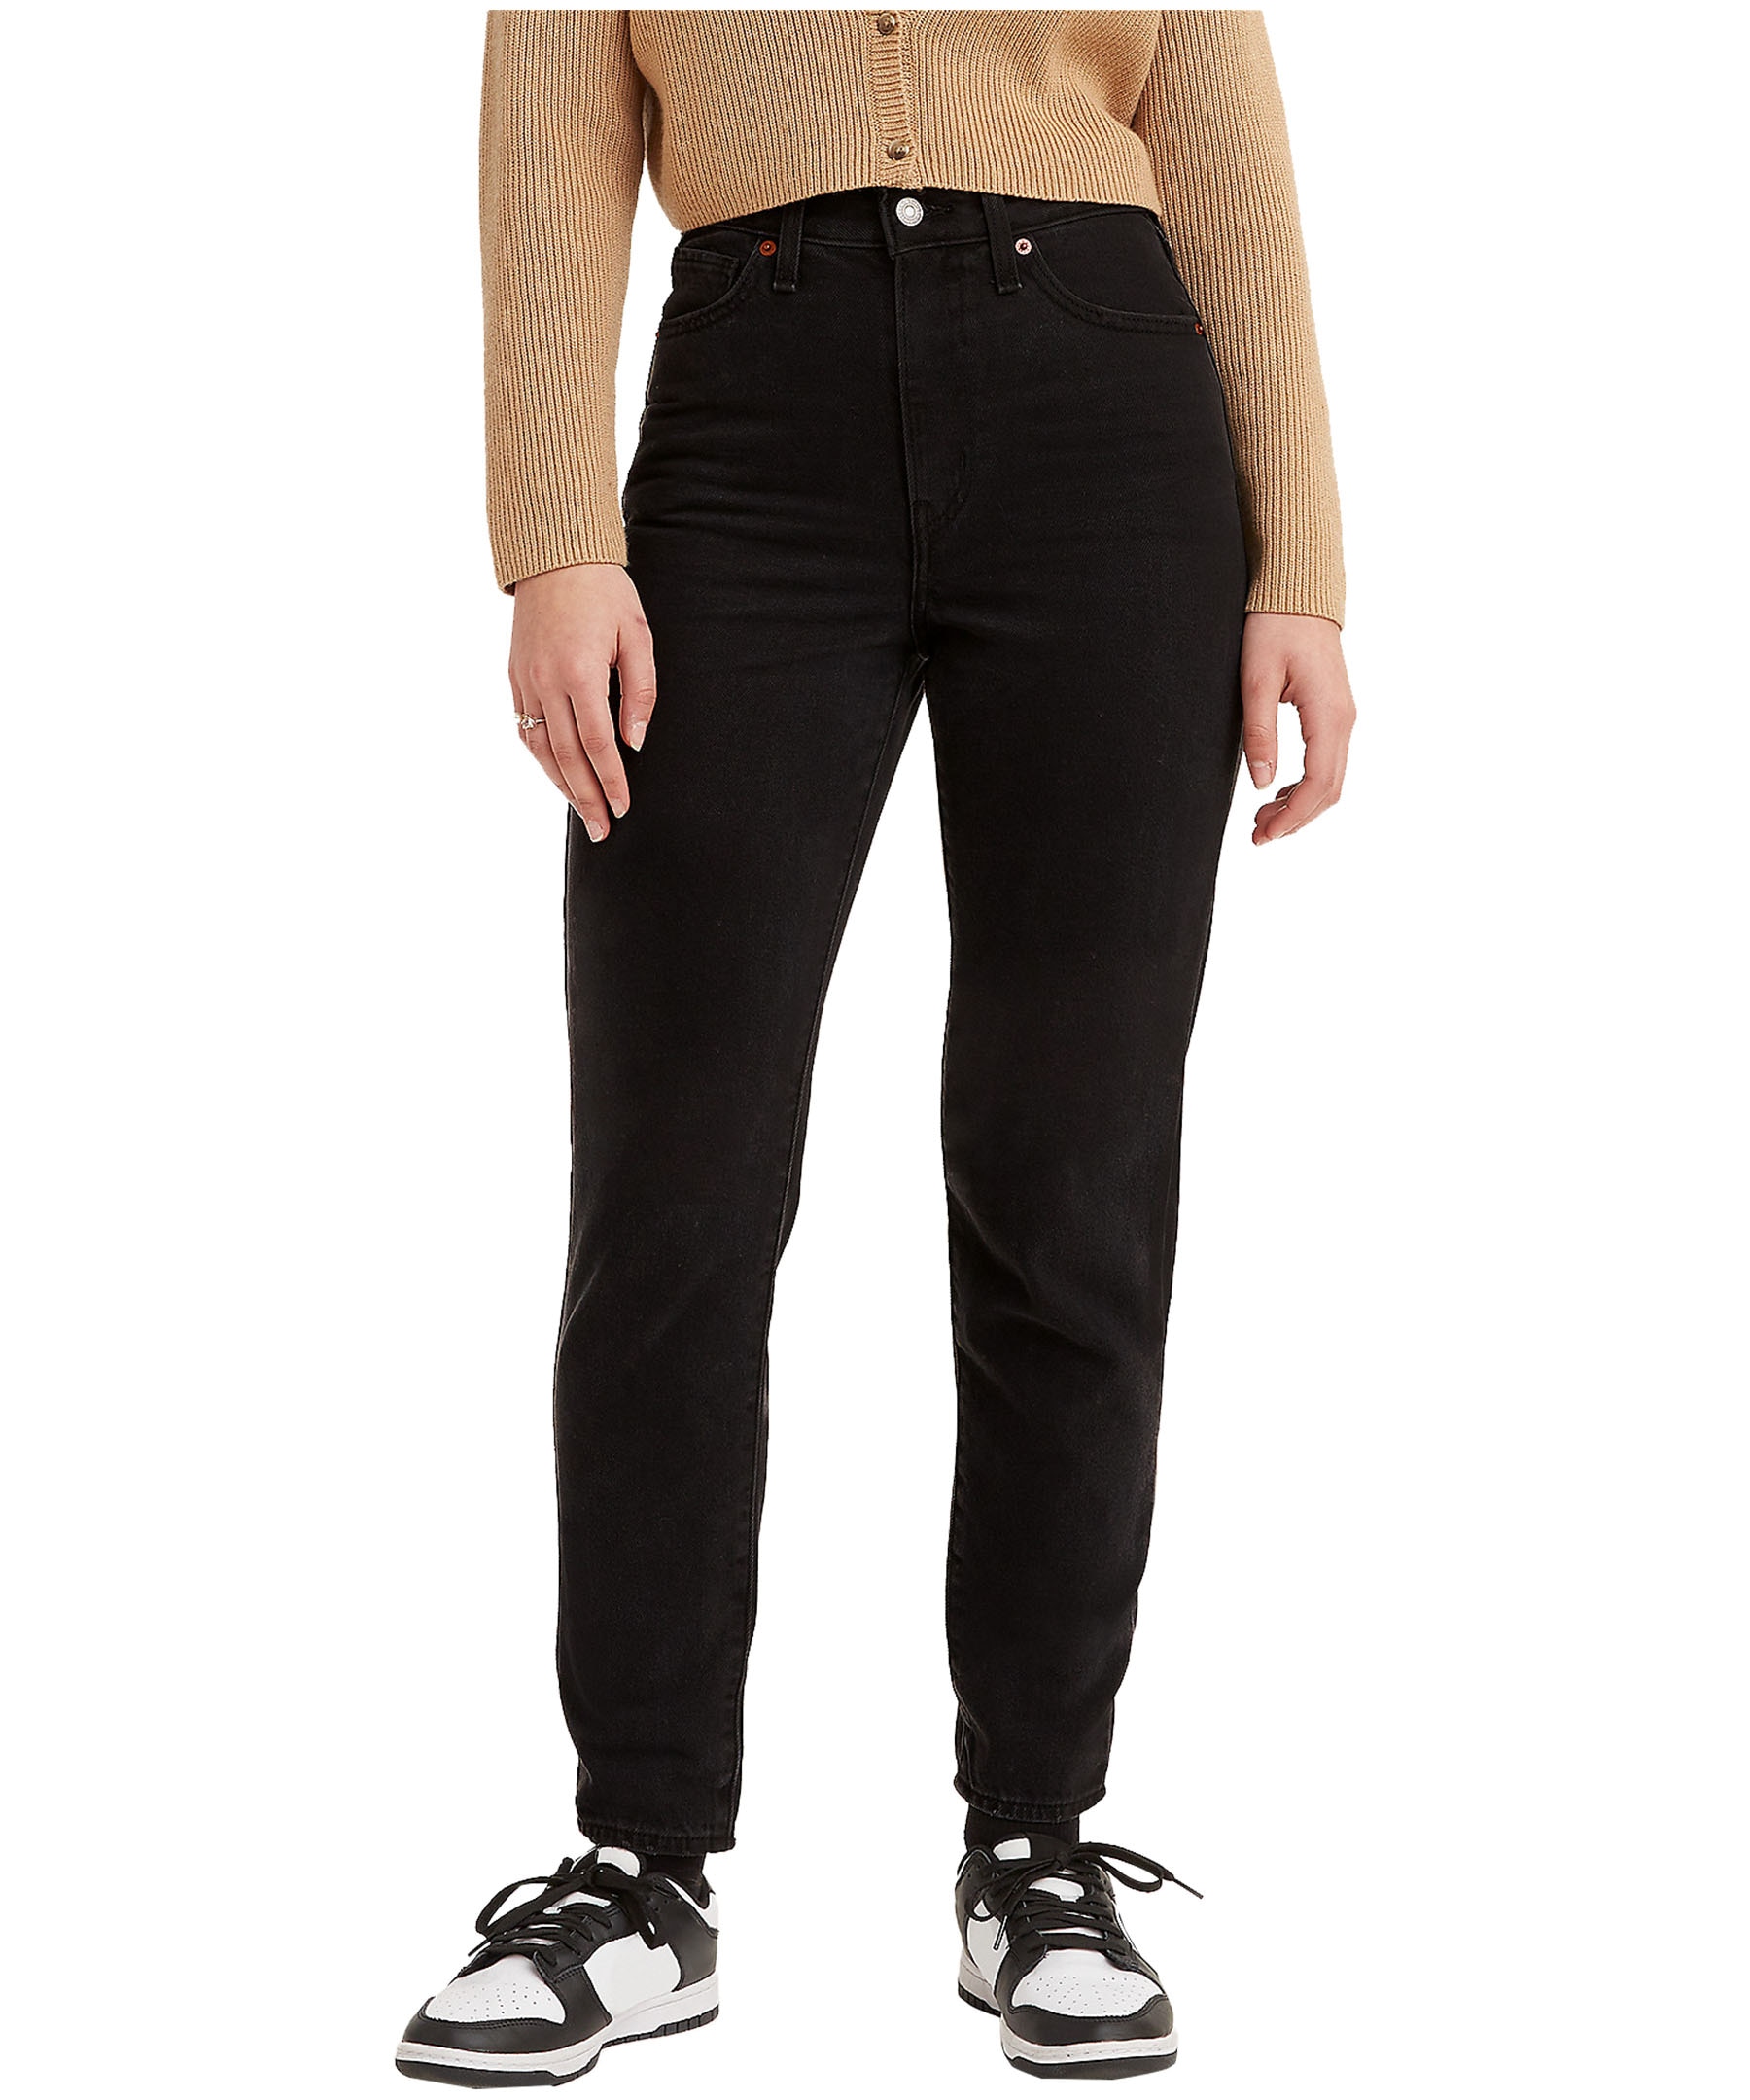 https://media-www.marks.com/product/marks-work-wearhouse/ladies-world/ladies-denim/410035313295/levi-s-women-s-high-rise-tapered-leg-mom-jeans-black-7109a931-b26a-4344-b3d0-e24d64dcfd1c.png